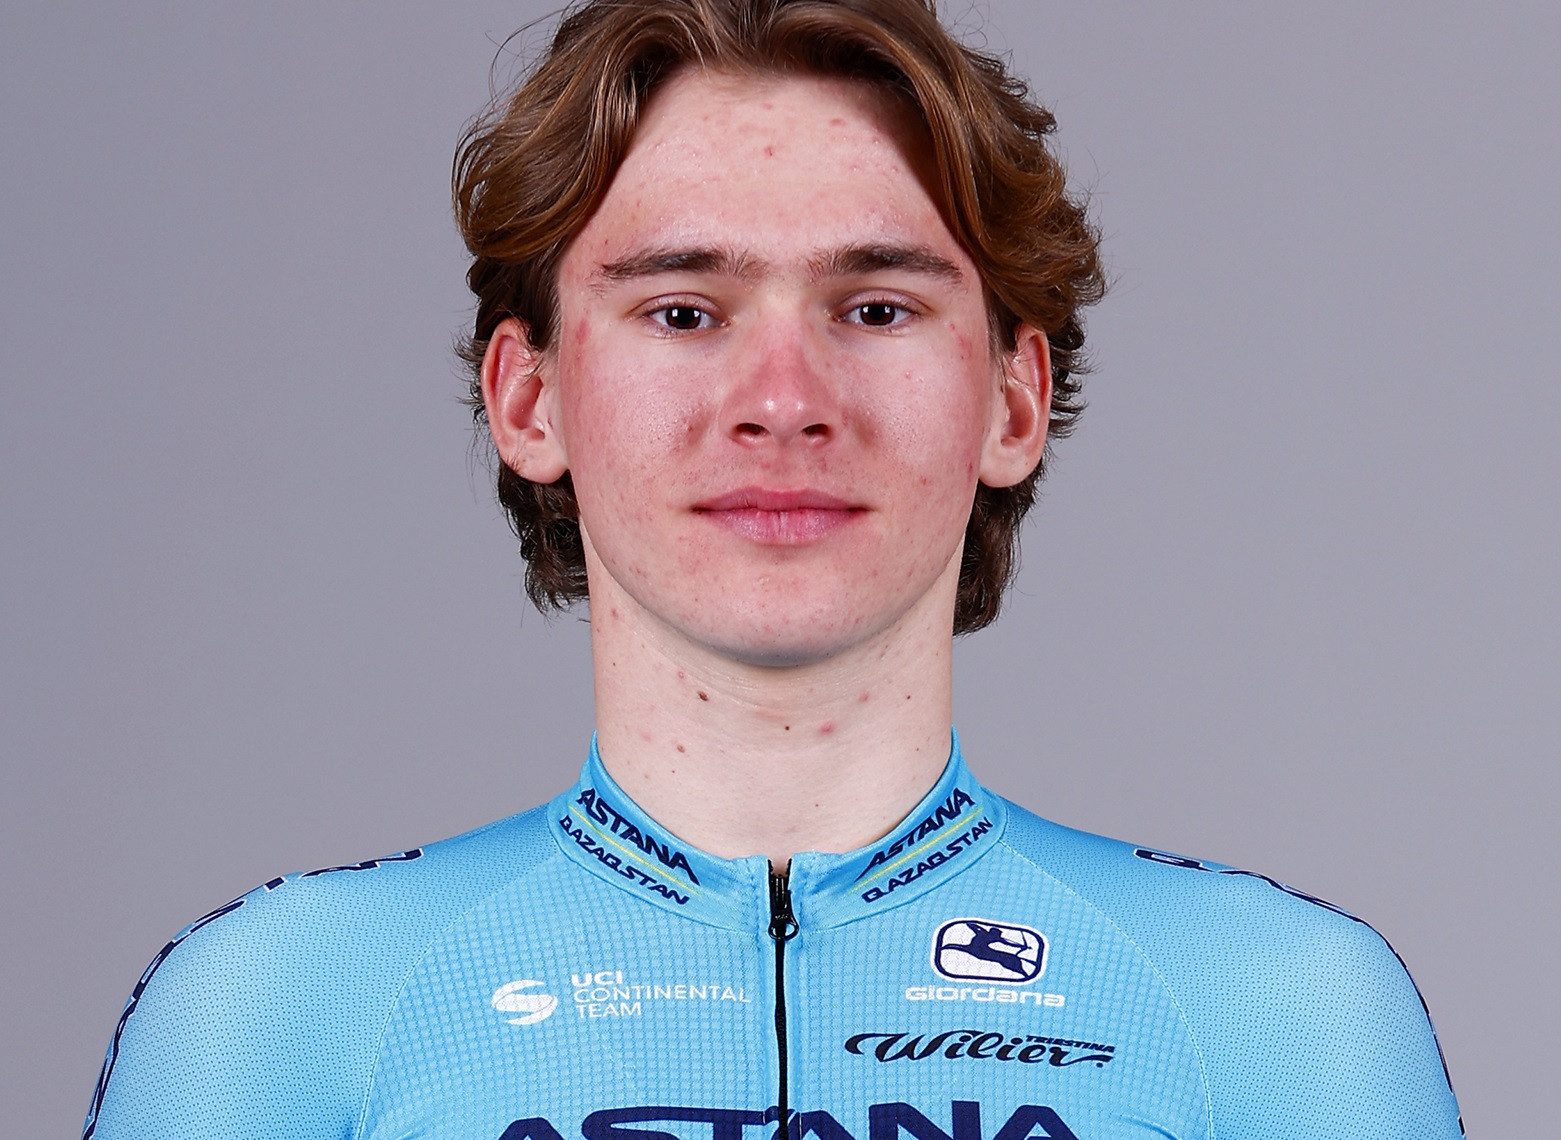 Russian teenage rider Savelii Laptev has been barred from UCI competitions after activity on his social media account allegedly indicating support for the war in Ukraine ©Astana Qazaqstan DT